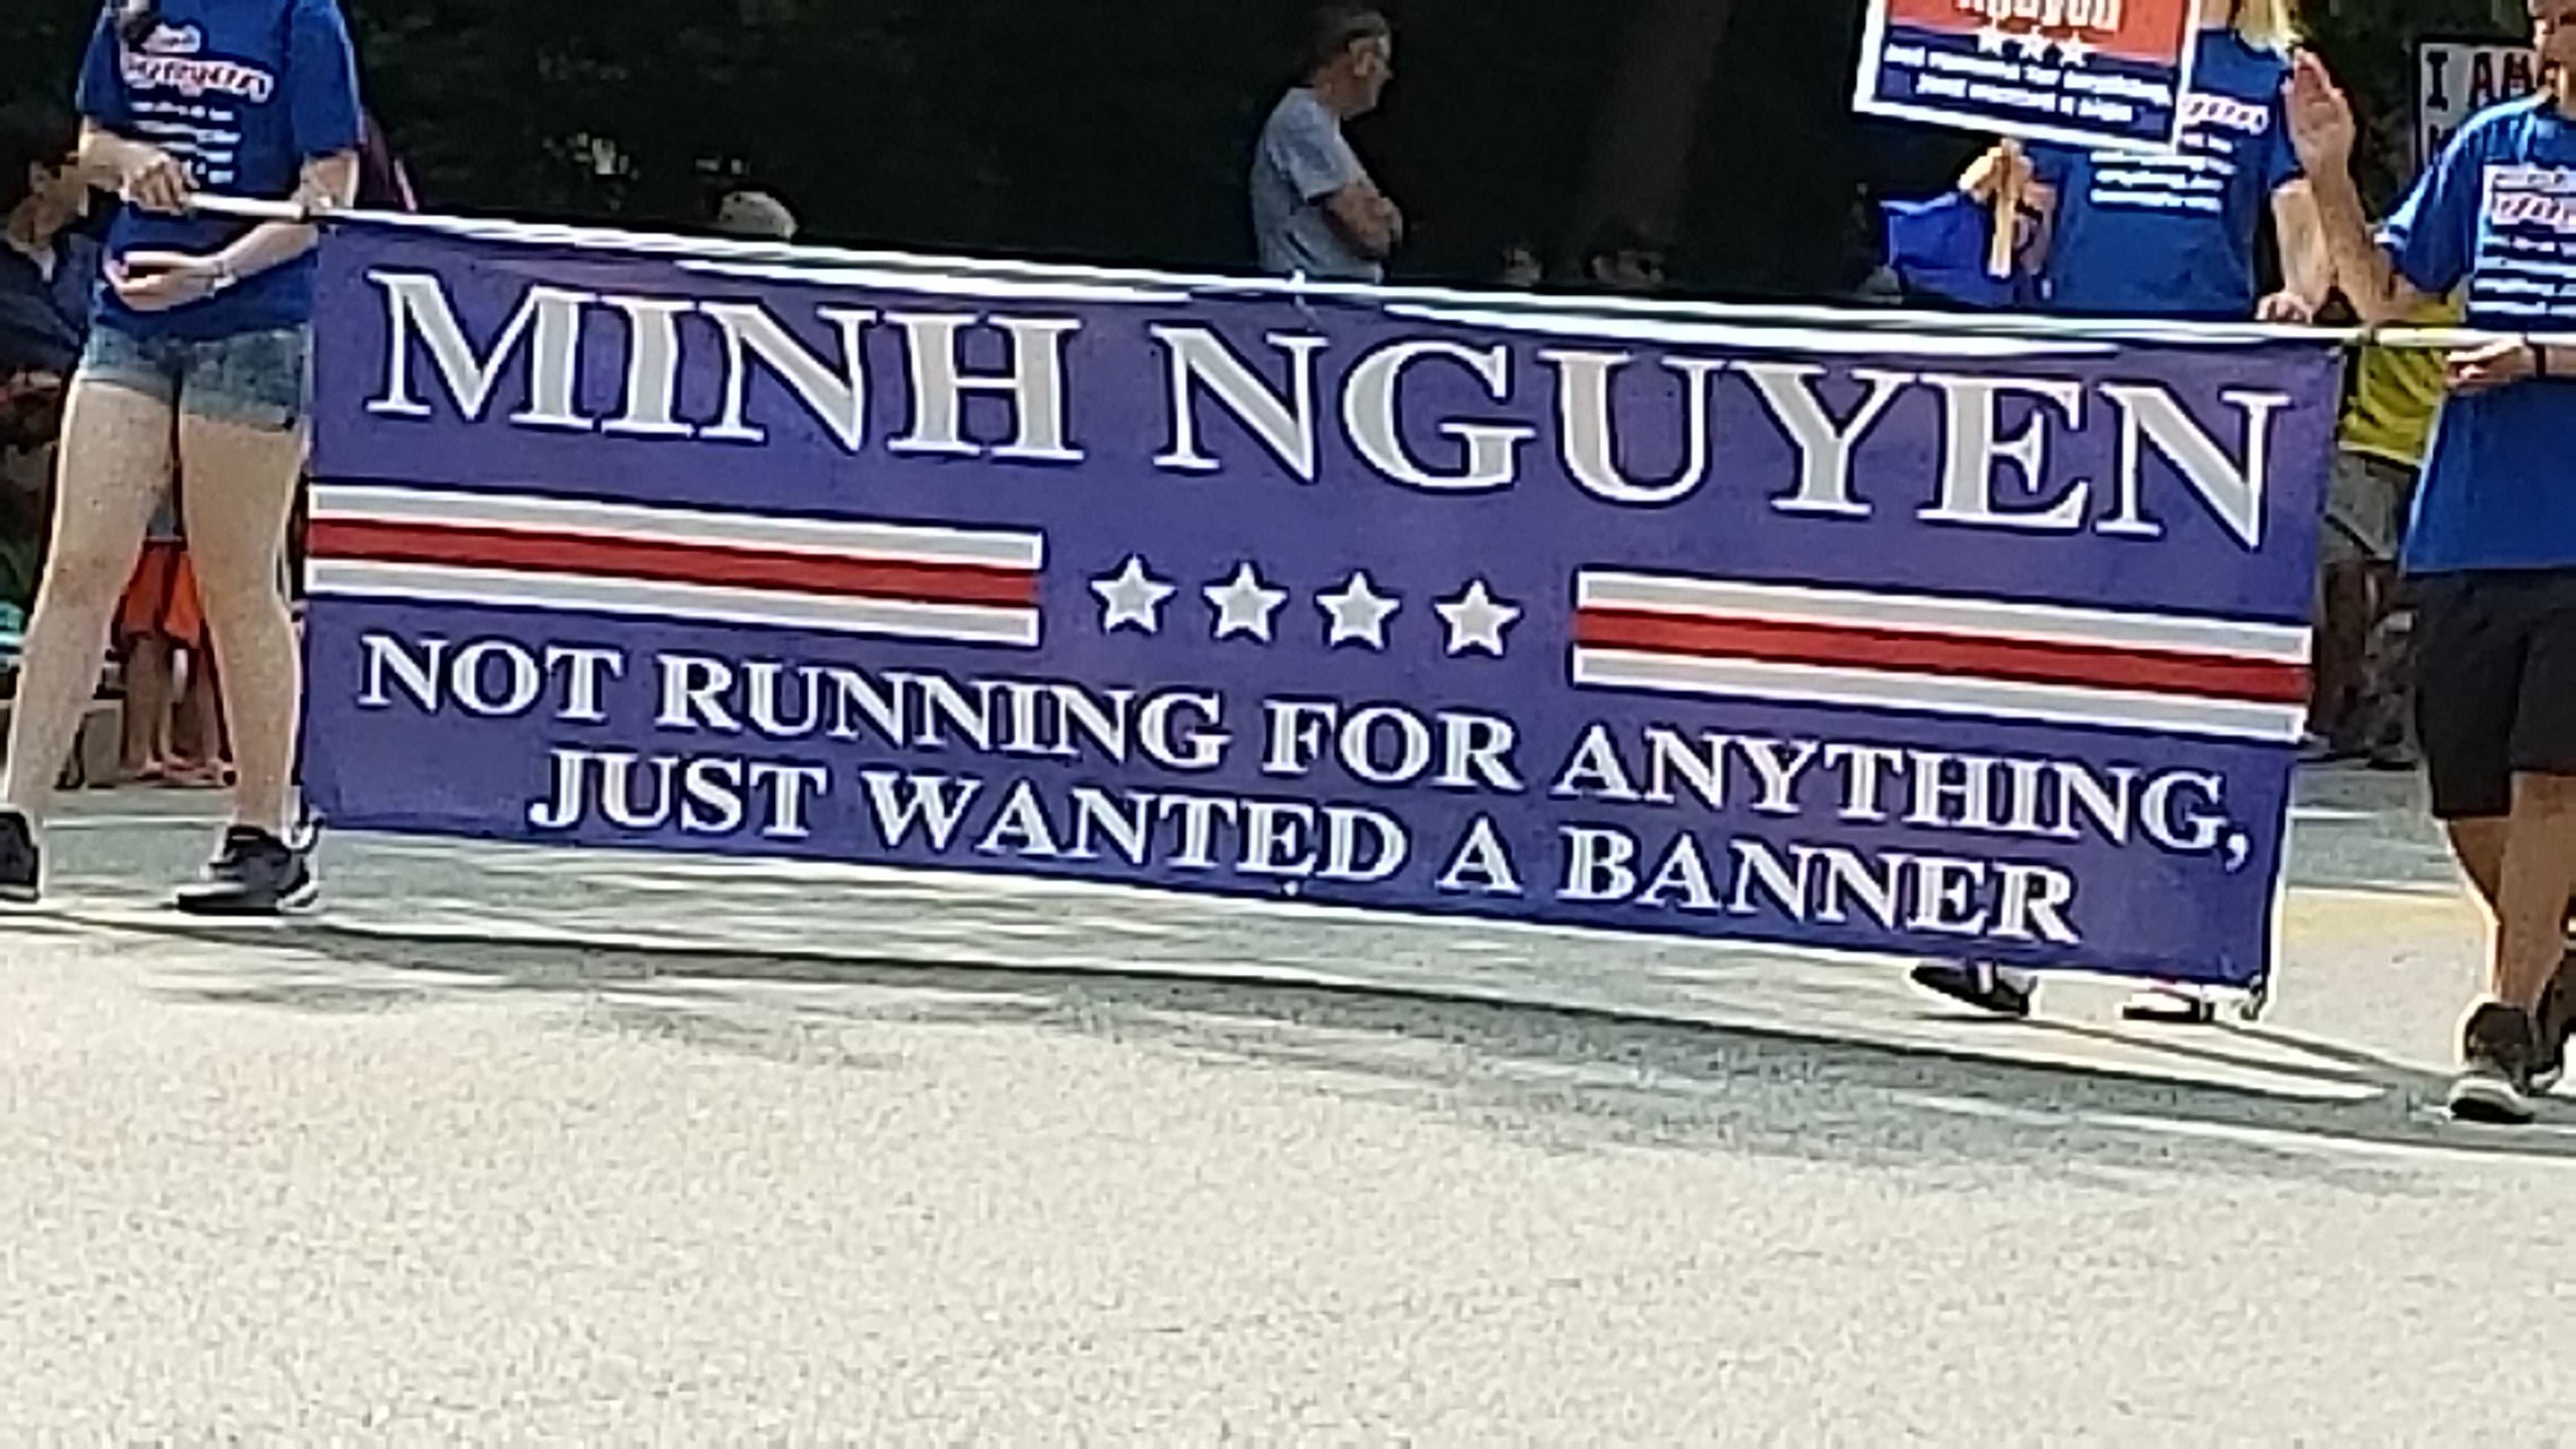 Just wanted to be part of the 4th of July parade